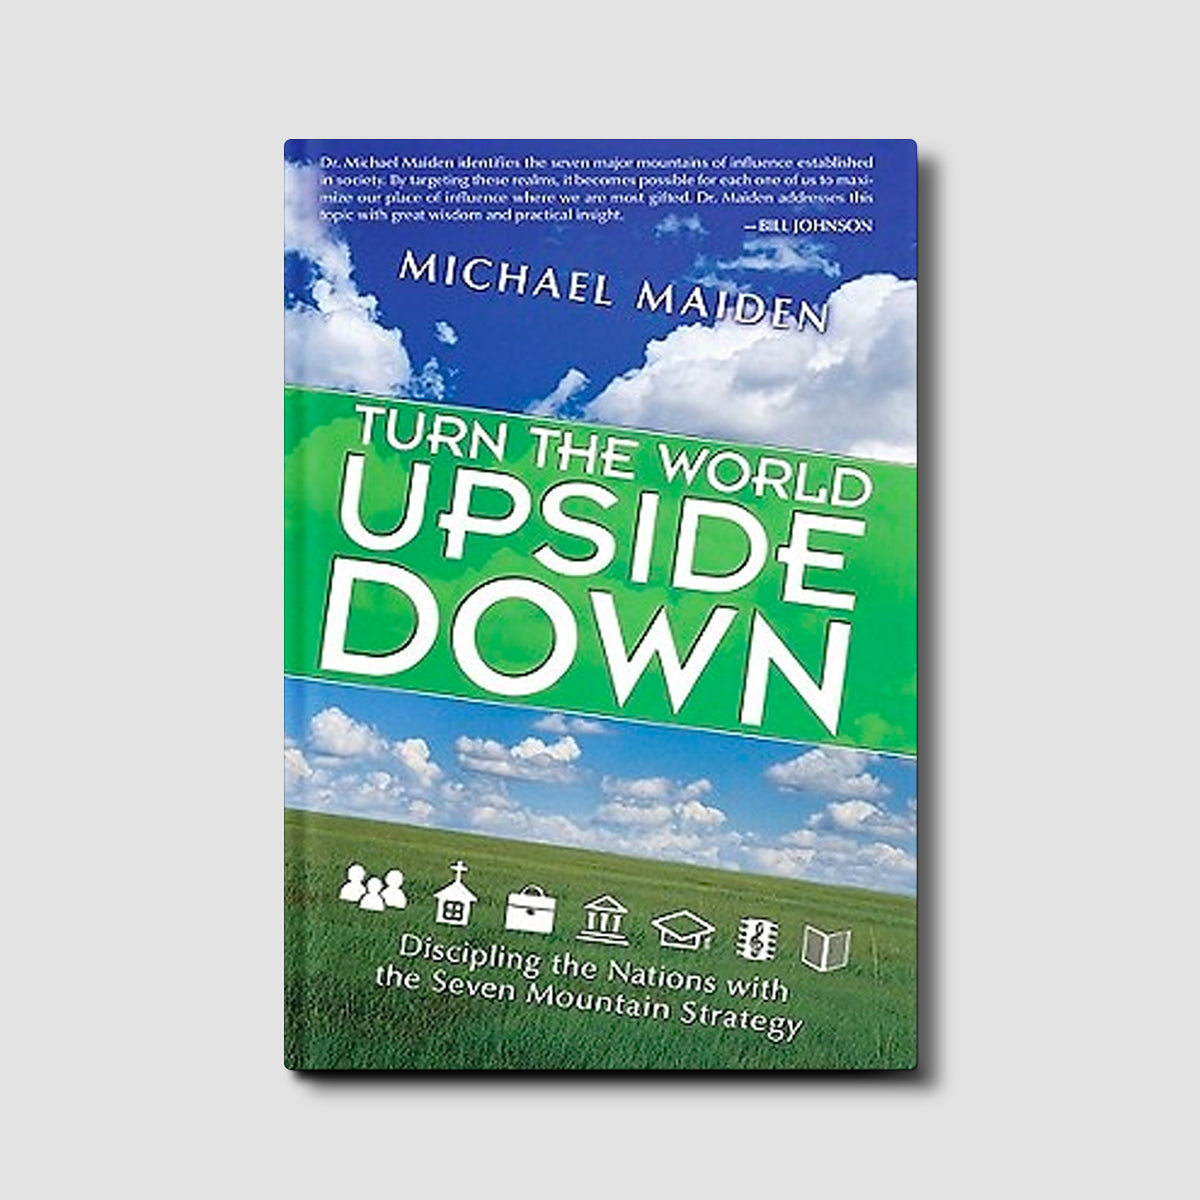 Turn the World Upside Down: Disciplining the Nations with the Seven Mountain Strategy